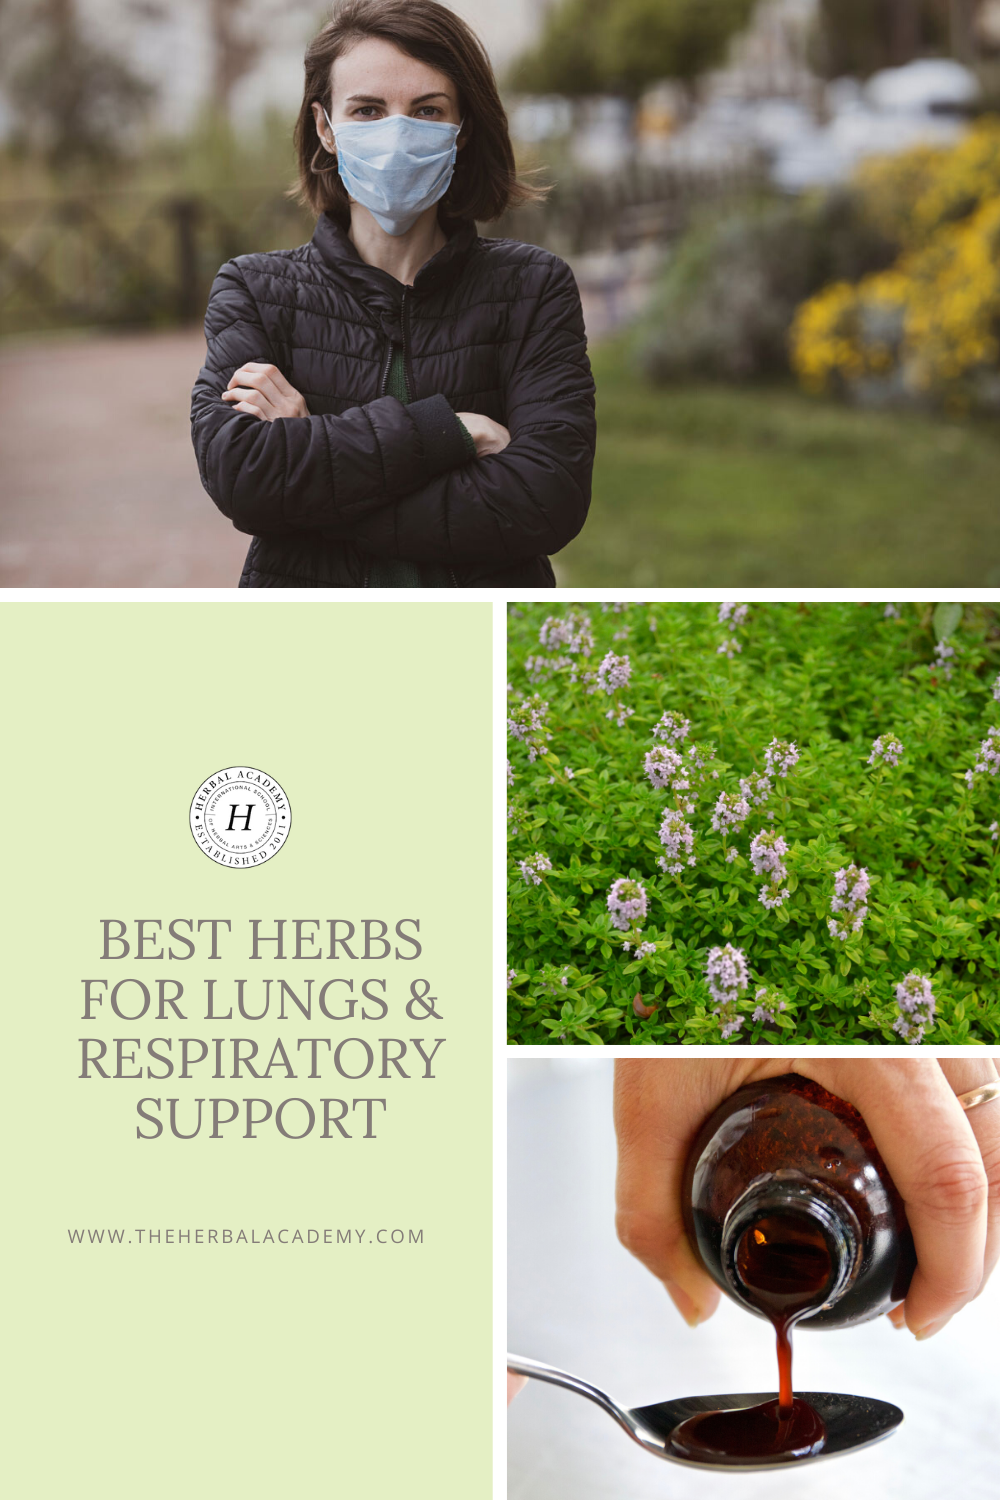 Best Herbs for Lungs and Respiratory Support | The Herbal Academy | For viral respiratory infections, turn to herbs that have strong immune or antiviral actions in addition to herbs for lungs and basic respiratory support.